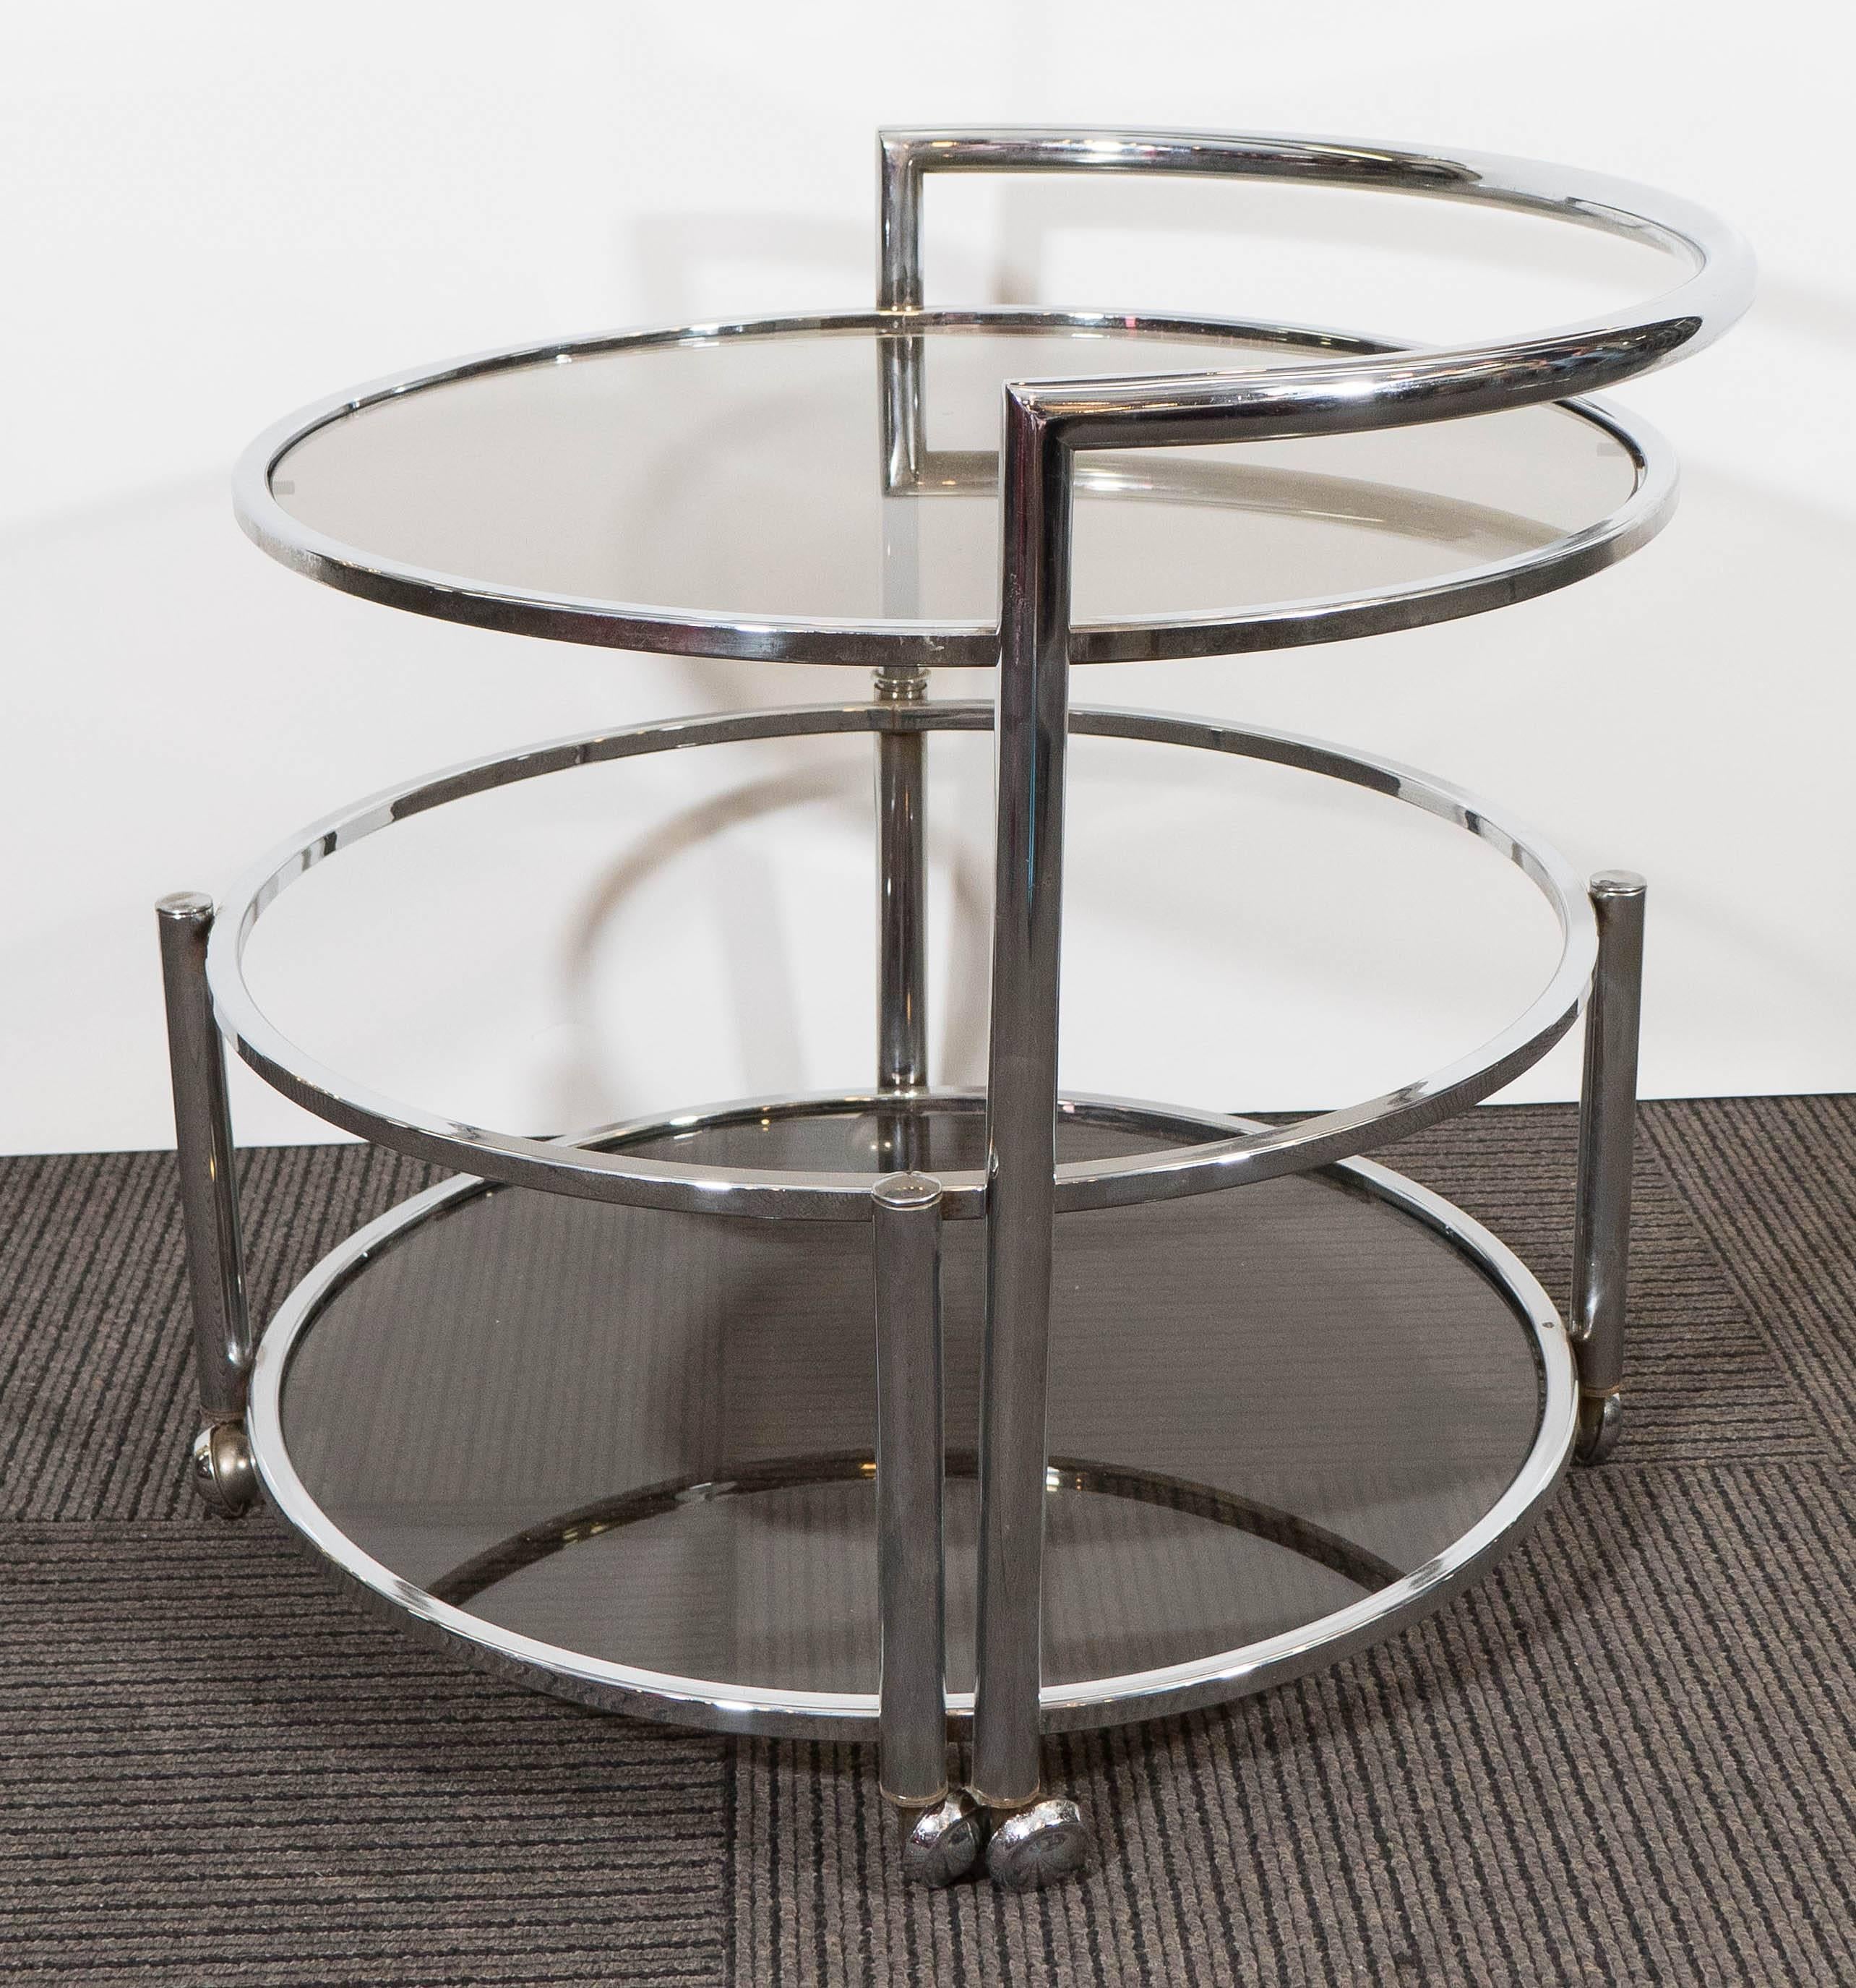 Polished Midcentury Adjustable Round Occasional Table in Chrome & Smoked Glass on Casters